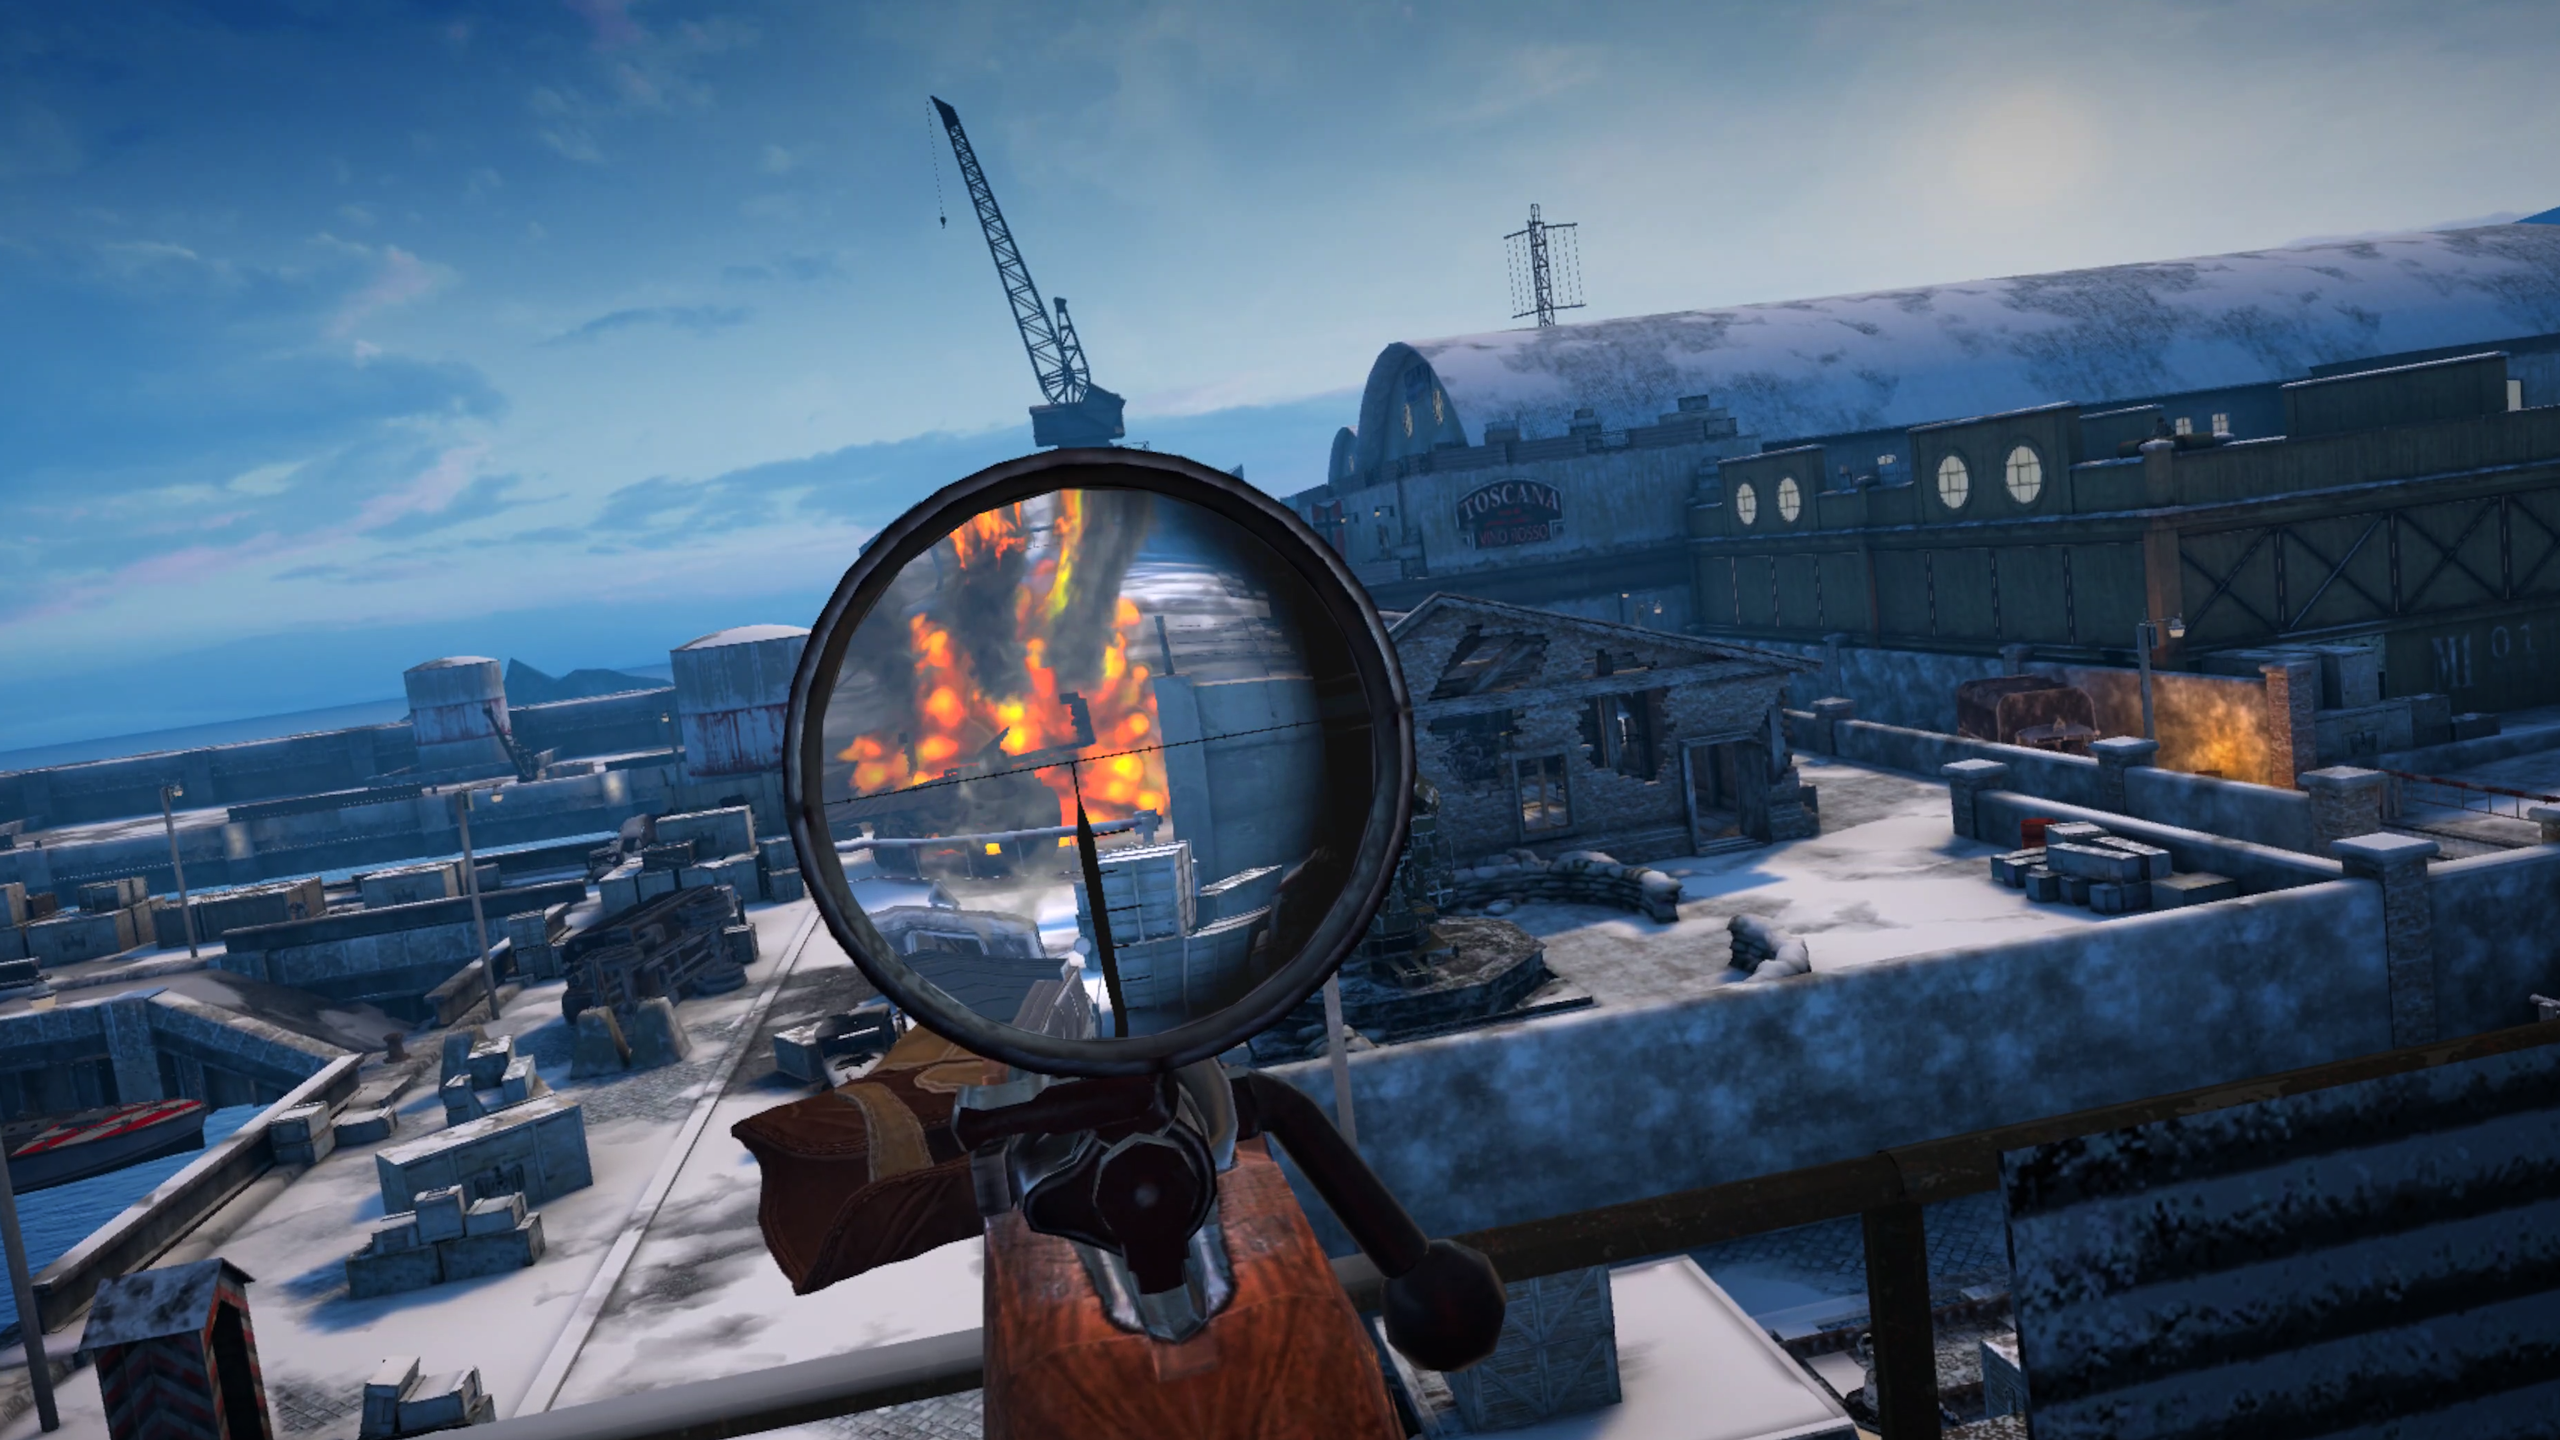 Gameplay screenshot of Sniper Elite VR Winter Warrior showing an industrial dockyard map on a sunny day. There is a first-person view of a sniper rifle which is currently scoped into the explosive aftermath of a shot.